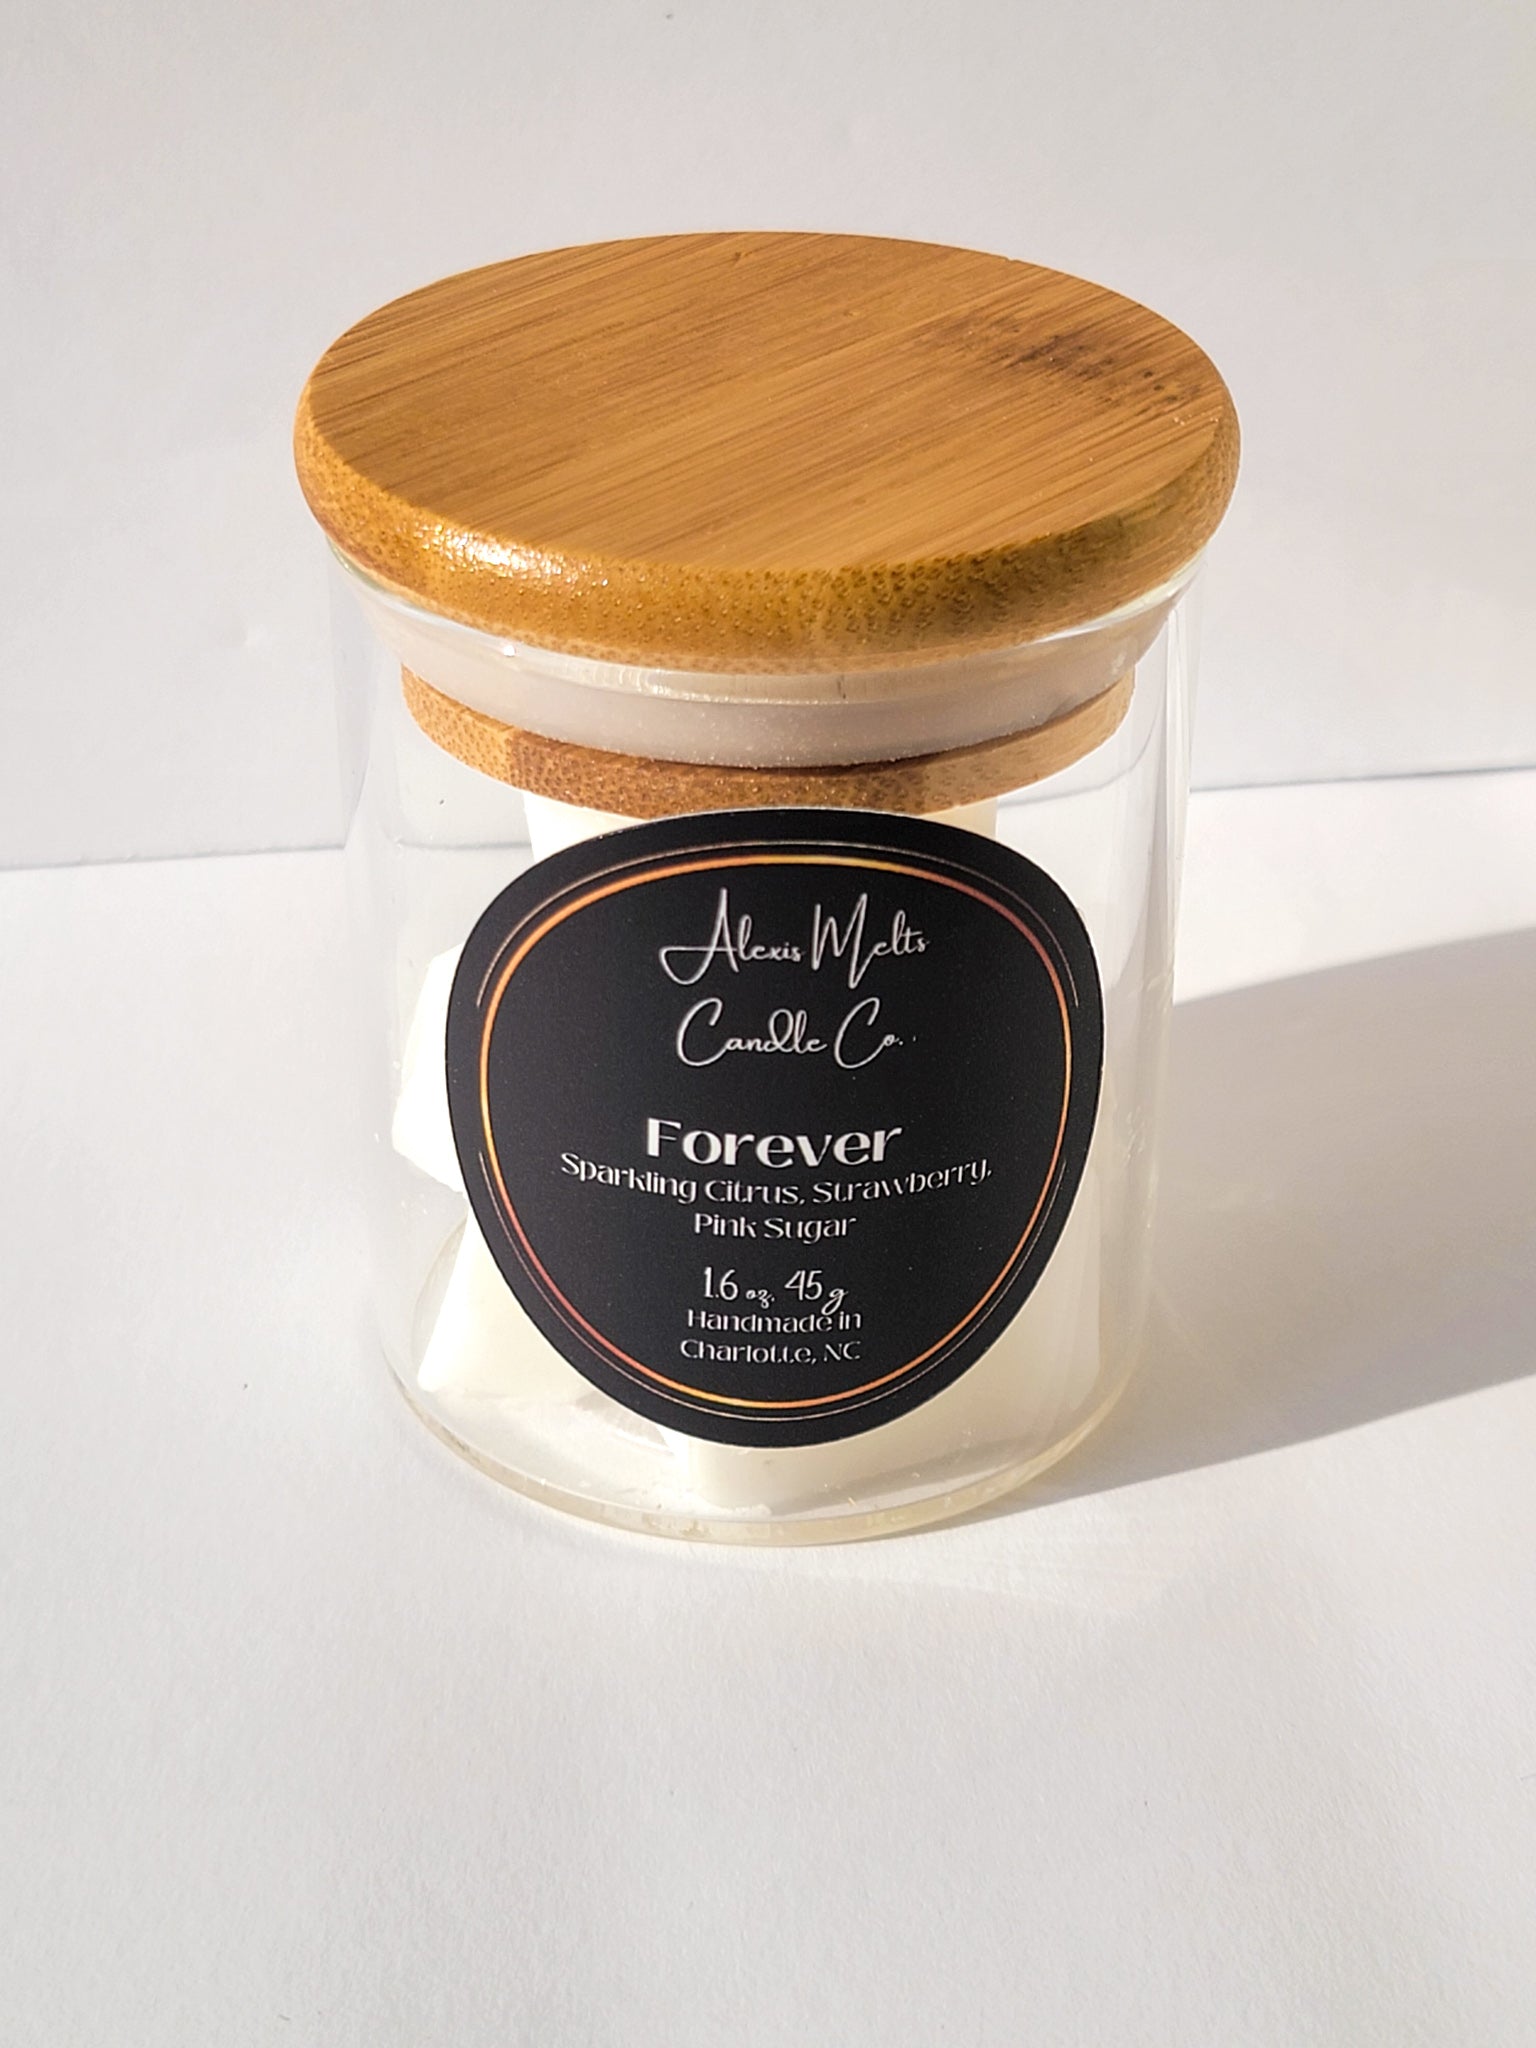 Wax Melts 1oz – THE CANDLE LICK CO.